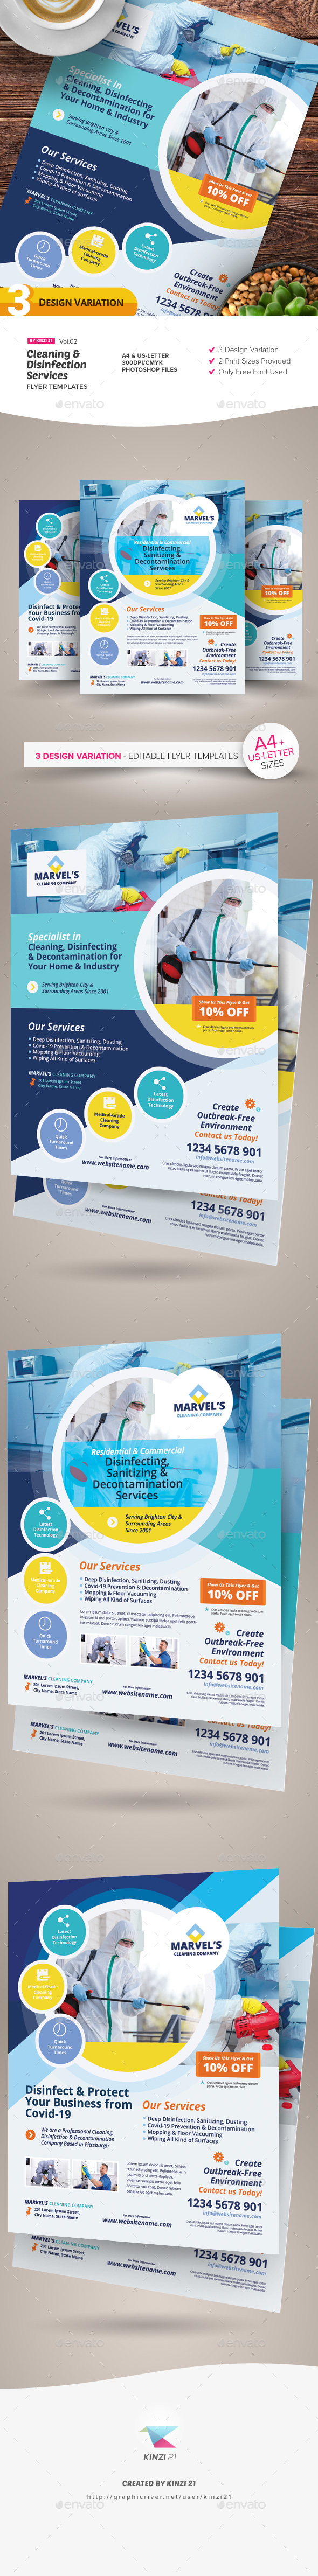 Cleaning & Disinfection Services Flyer Templates vol.02